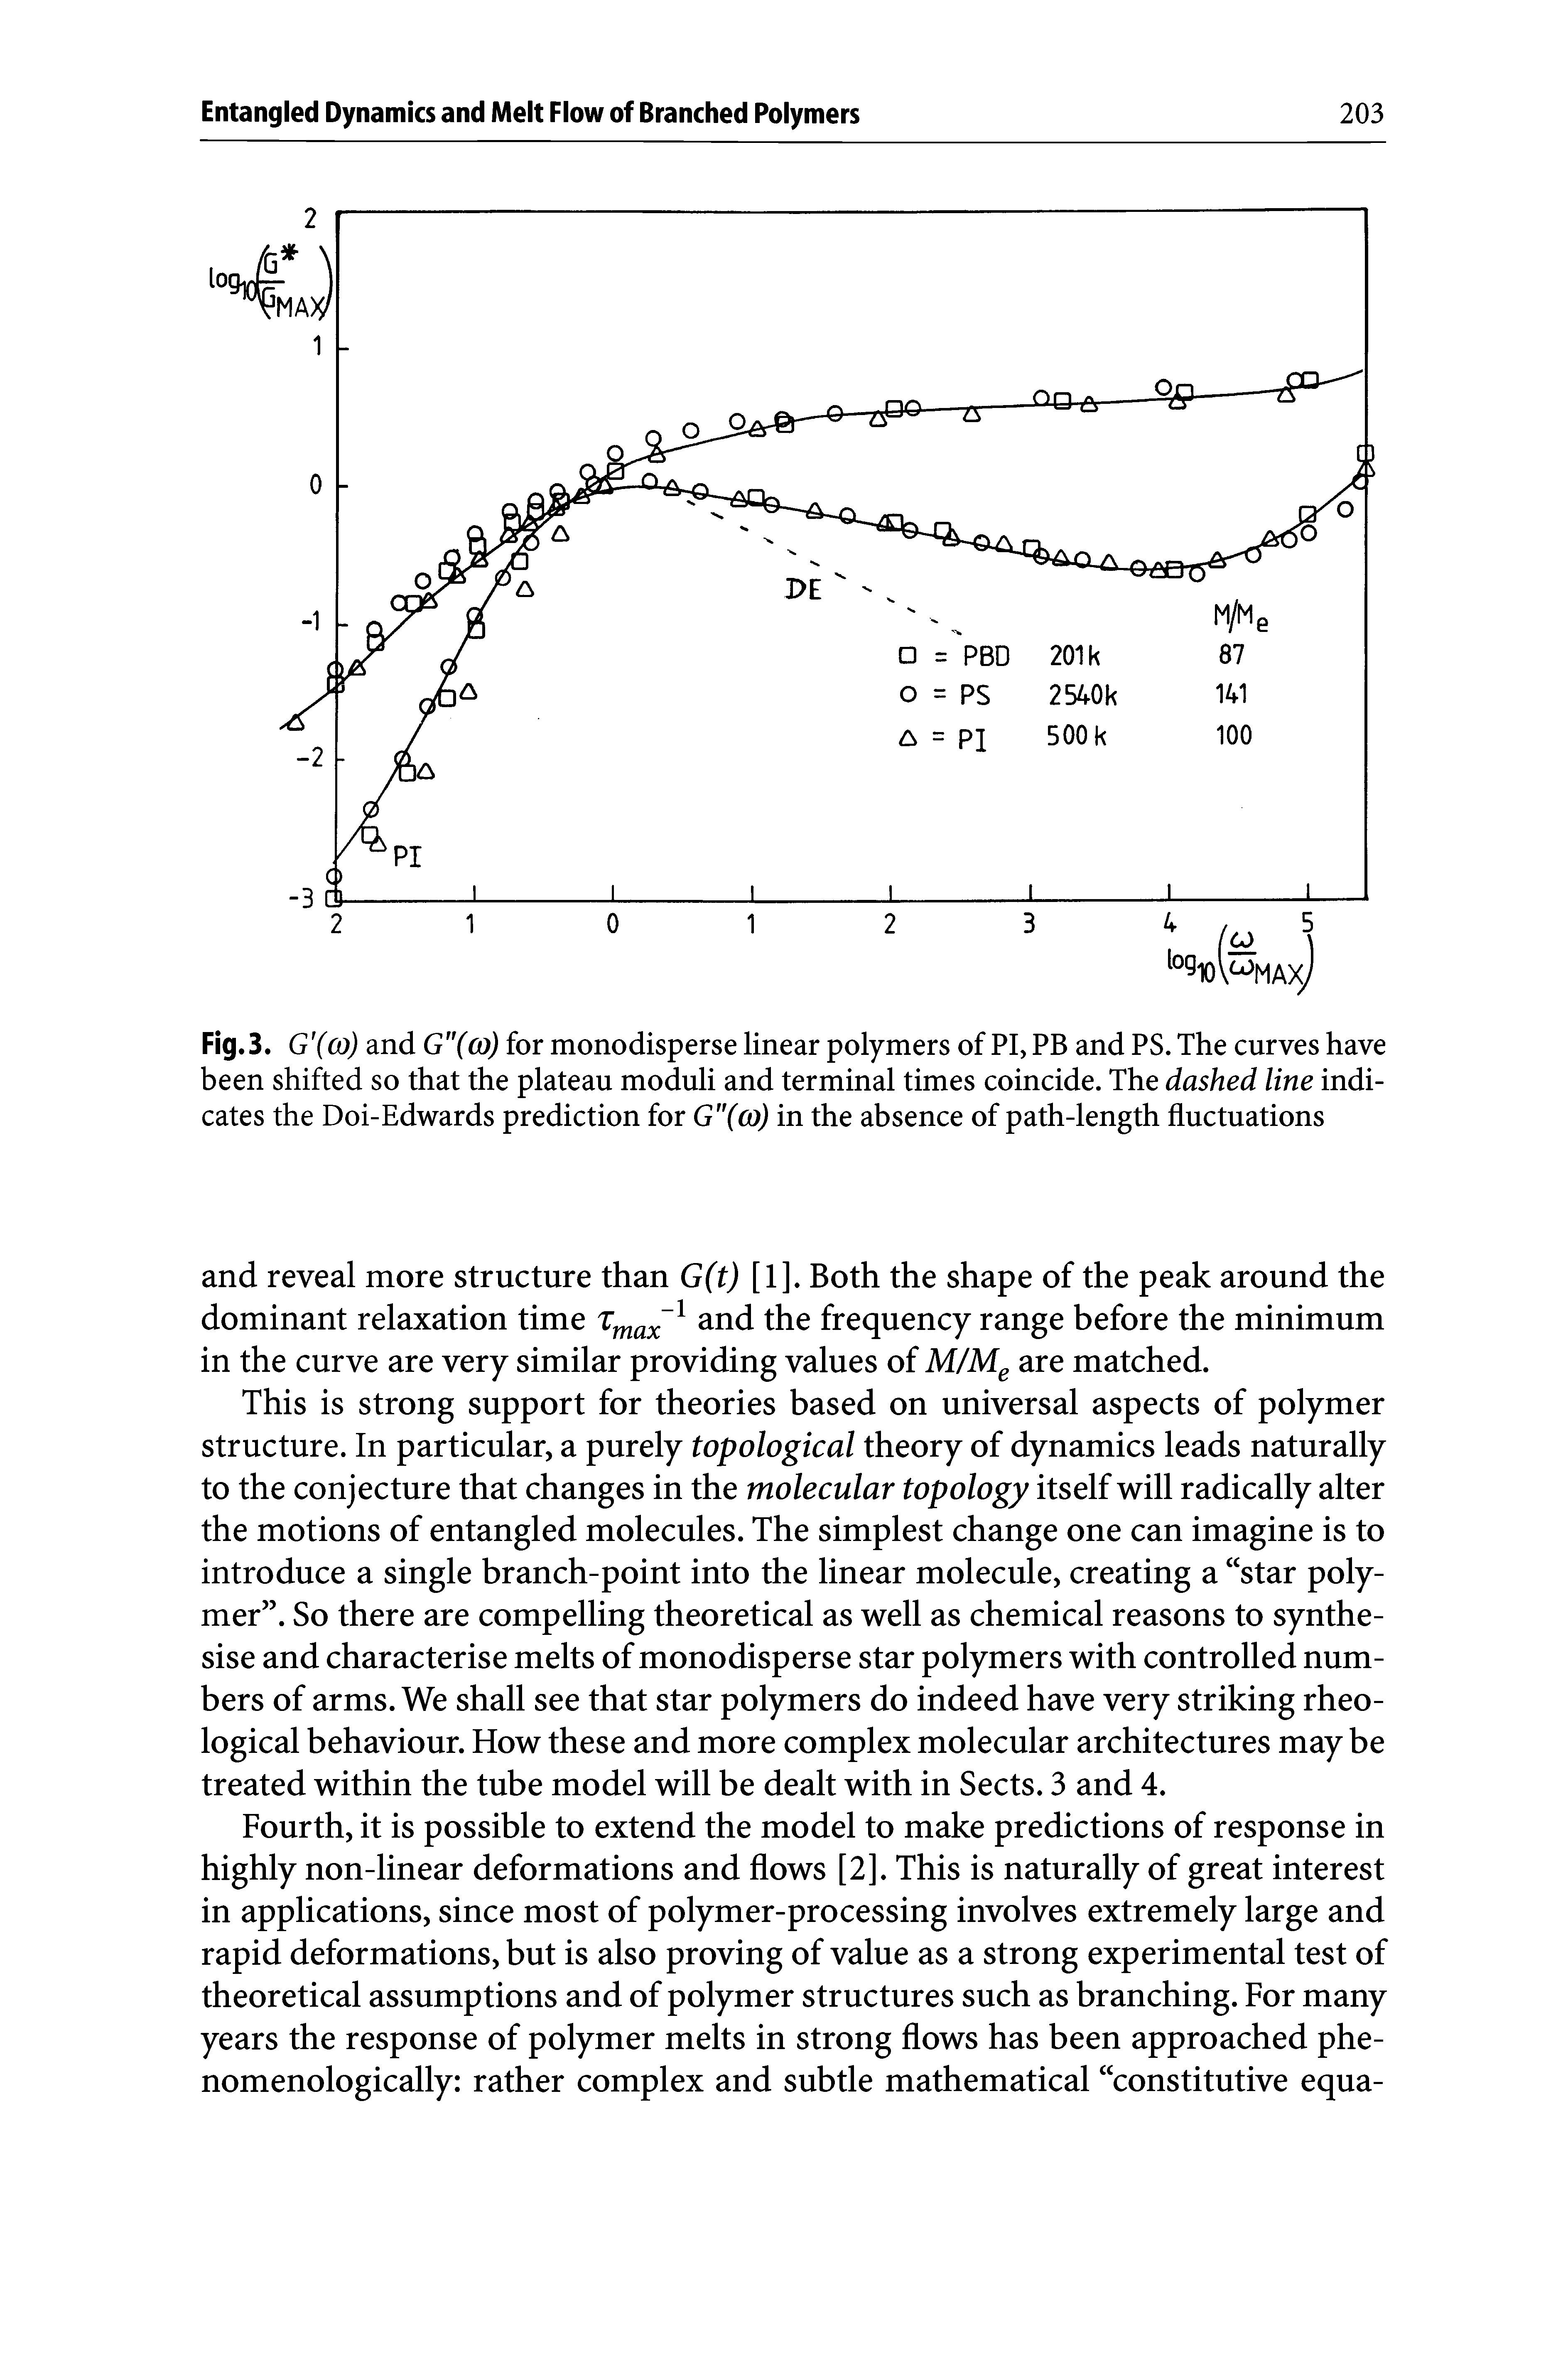 Fig.3. G (co) and G"(co) for monodisperse linear polymers of PI, PB and PS. The curves have been shifted so that the plateau moduli and terminal times coincide. The dashed line indicates the Doi-Edwards prediction for G"((o) in the absence of path-length fluctuations...